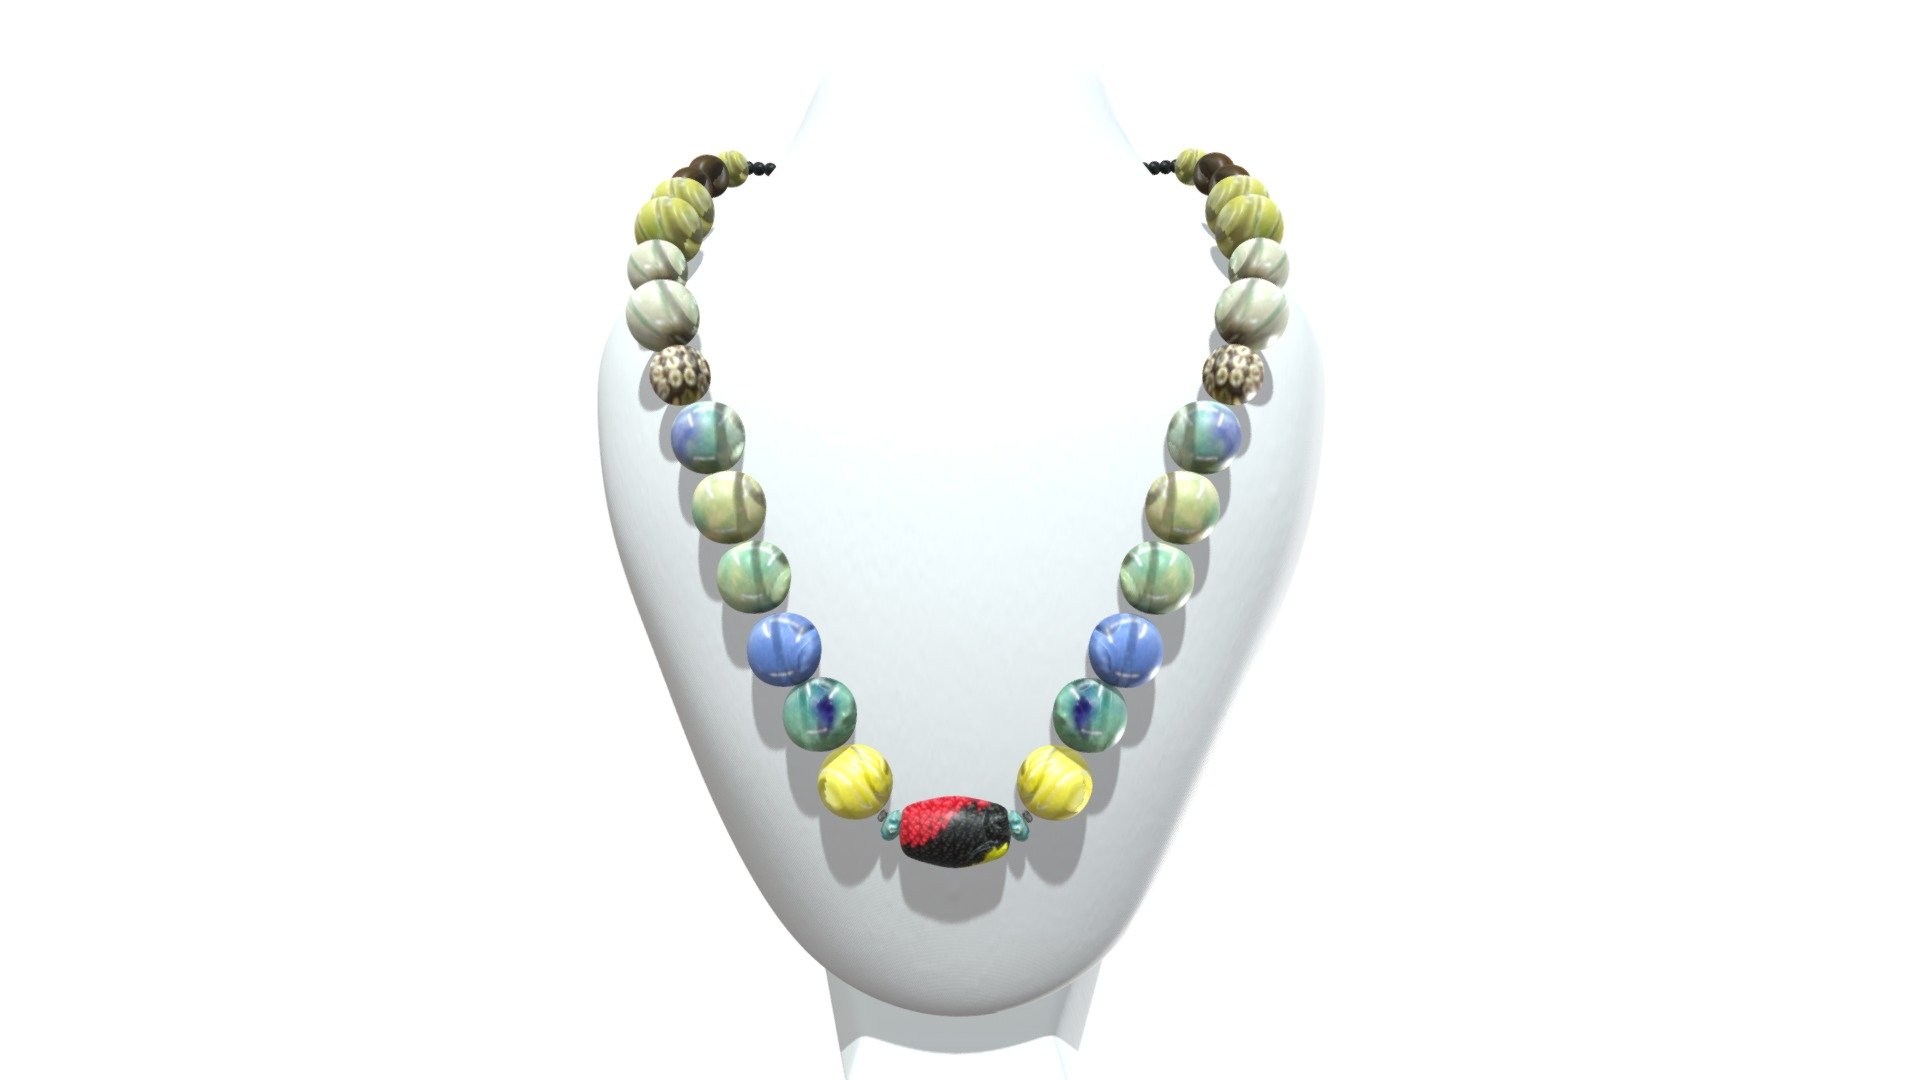 EMP (SWK) 11 B - SARAWAK BEADS NECKLACE Kabo - Download Free 3D model by eeelabvisual 3d model